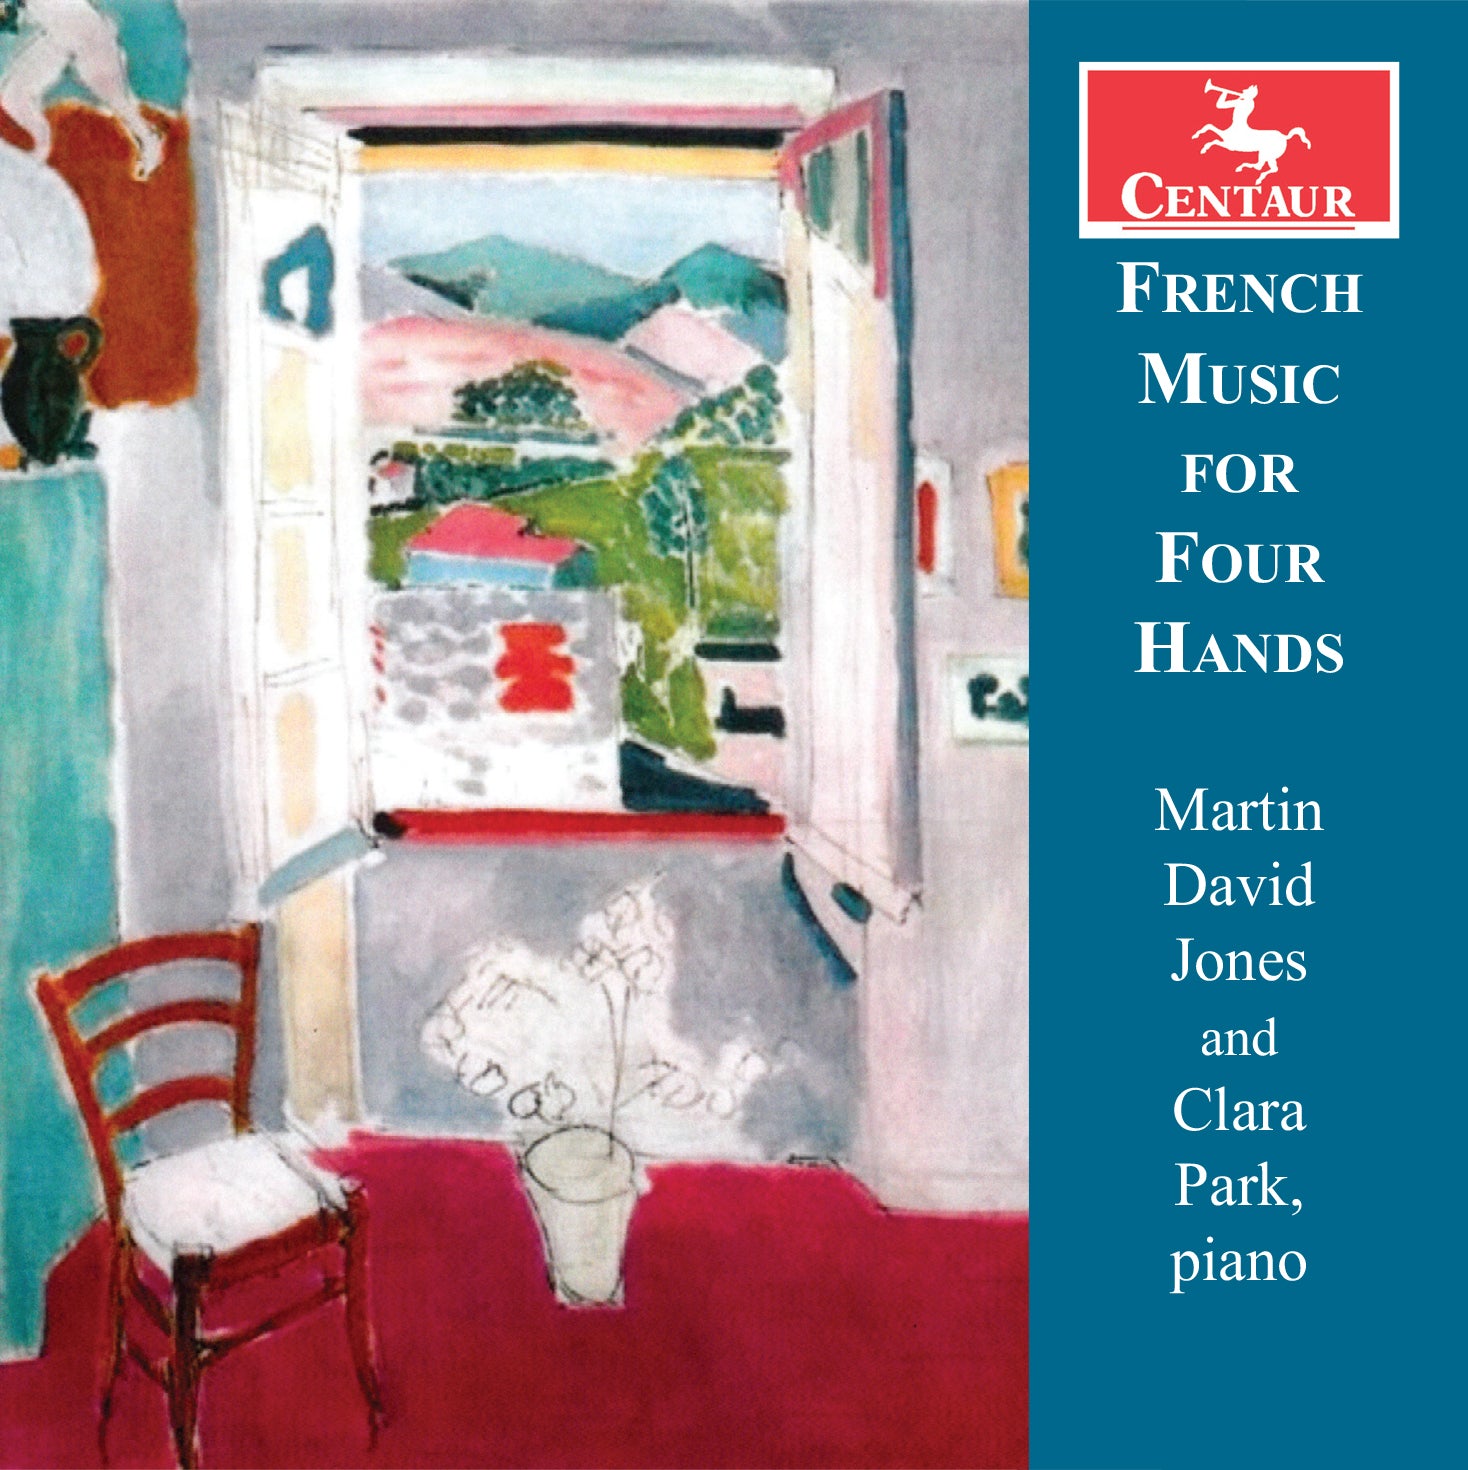 French Music for Piano Four Hands / Jones, Park